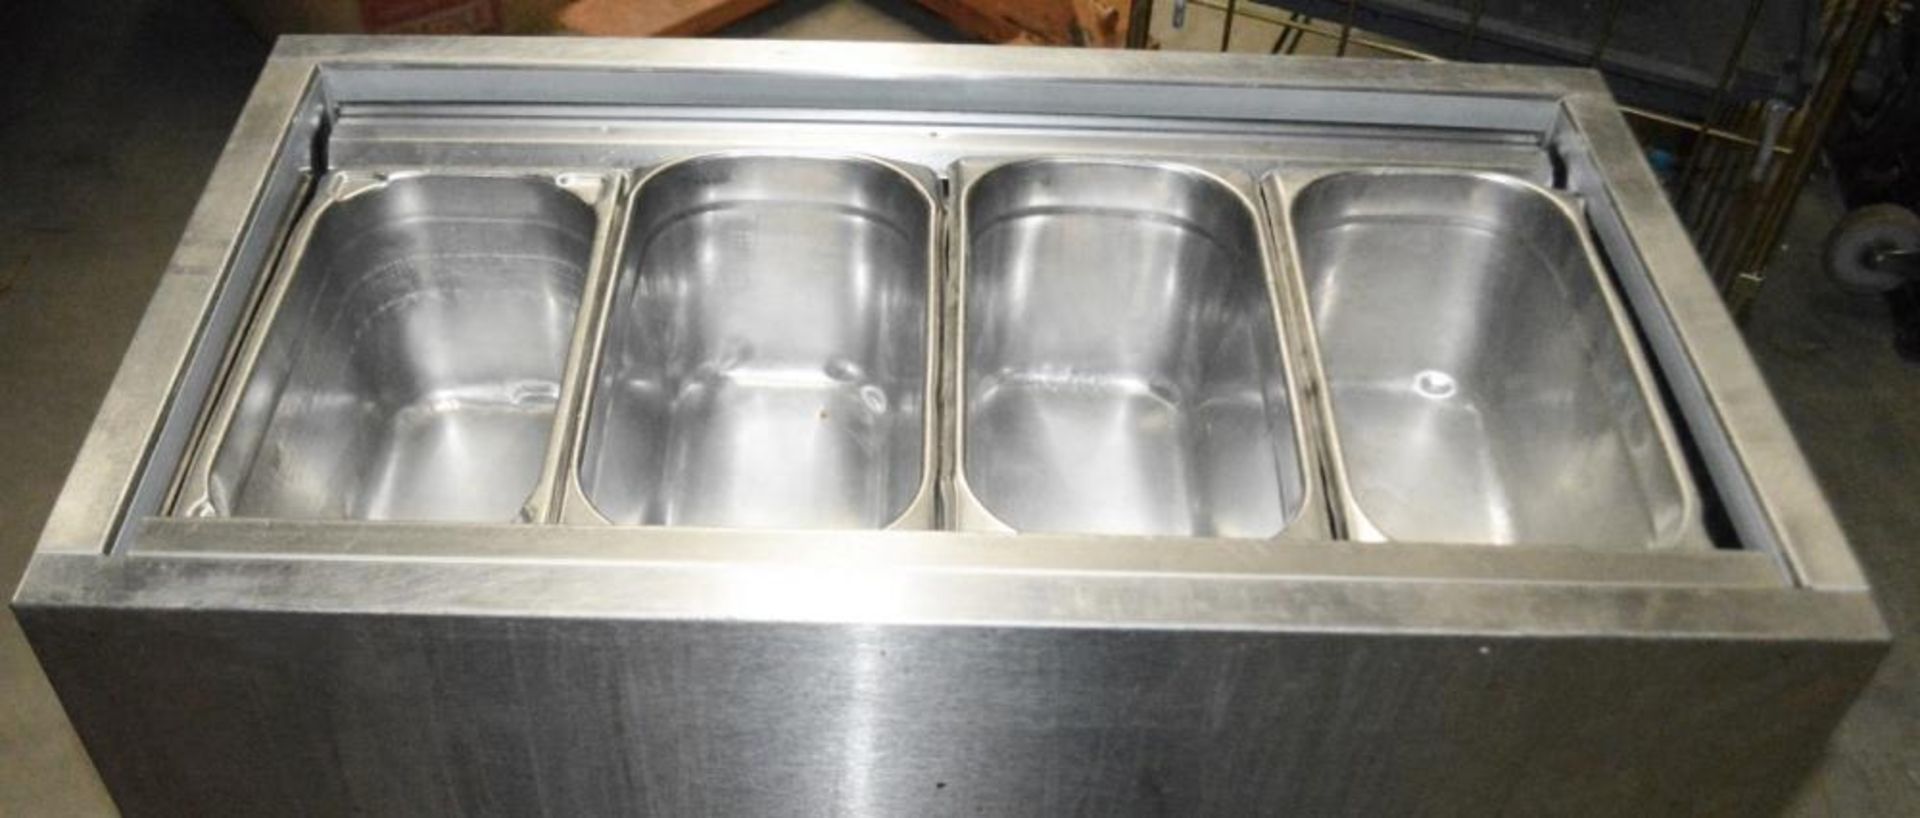 1 x Williams PW4/R290 Refrigerated Prep Well With 4 x Gastro Pans - Dimensions: H88 x W77 x D45cm - - Image 5 of 8